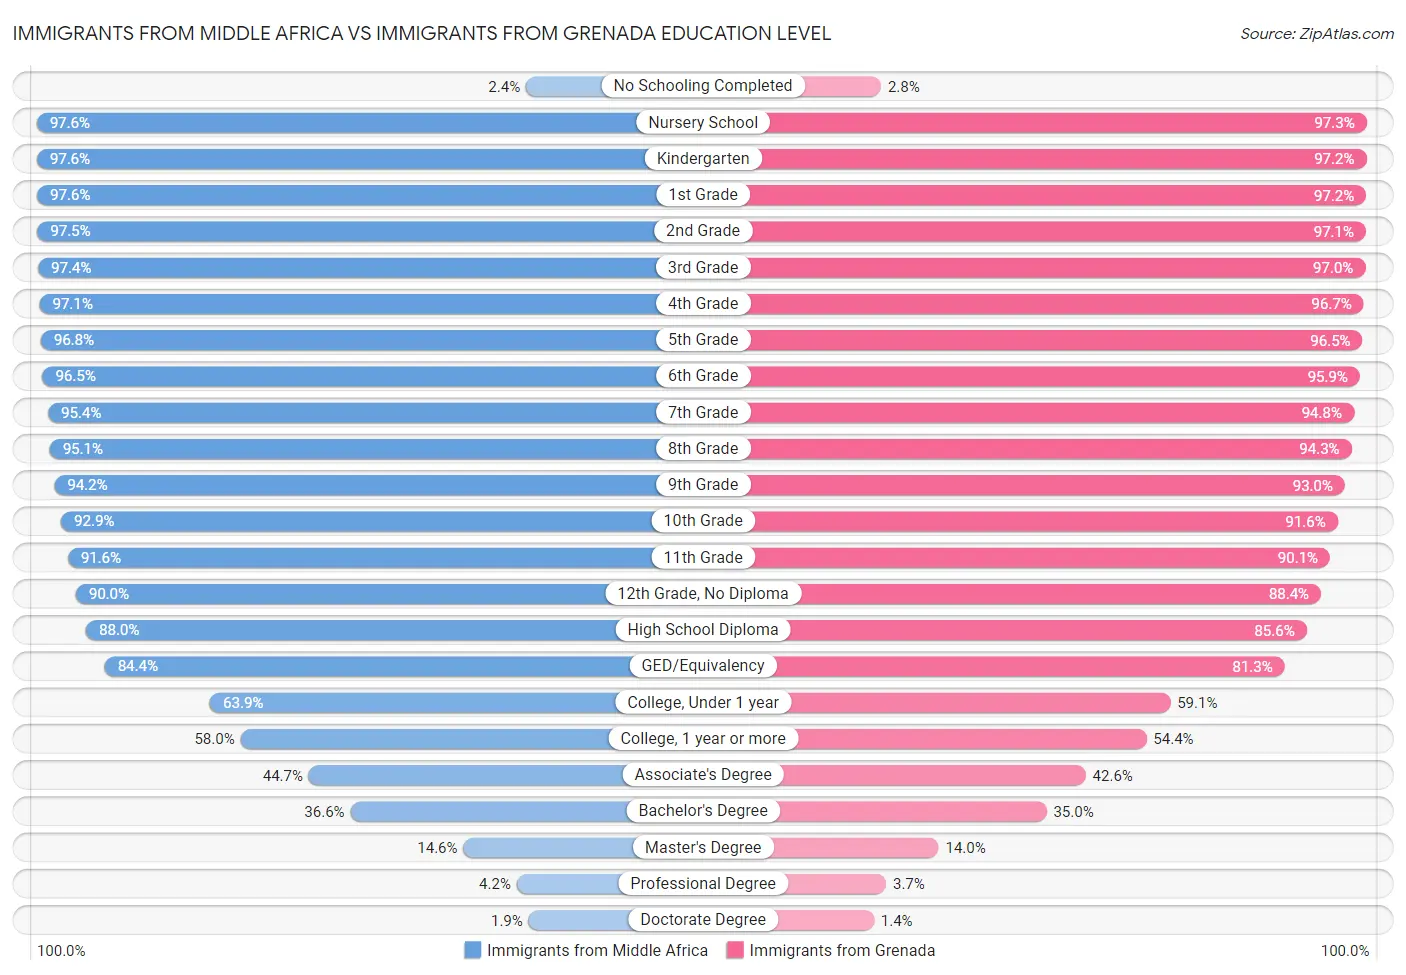 Immigrants from Middle Africa vs Immigrants from Grenada Education Level